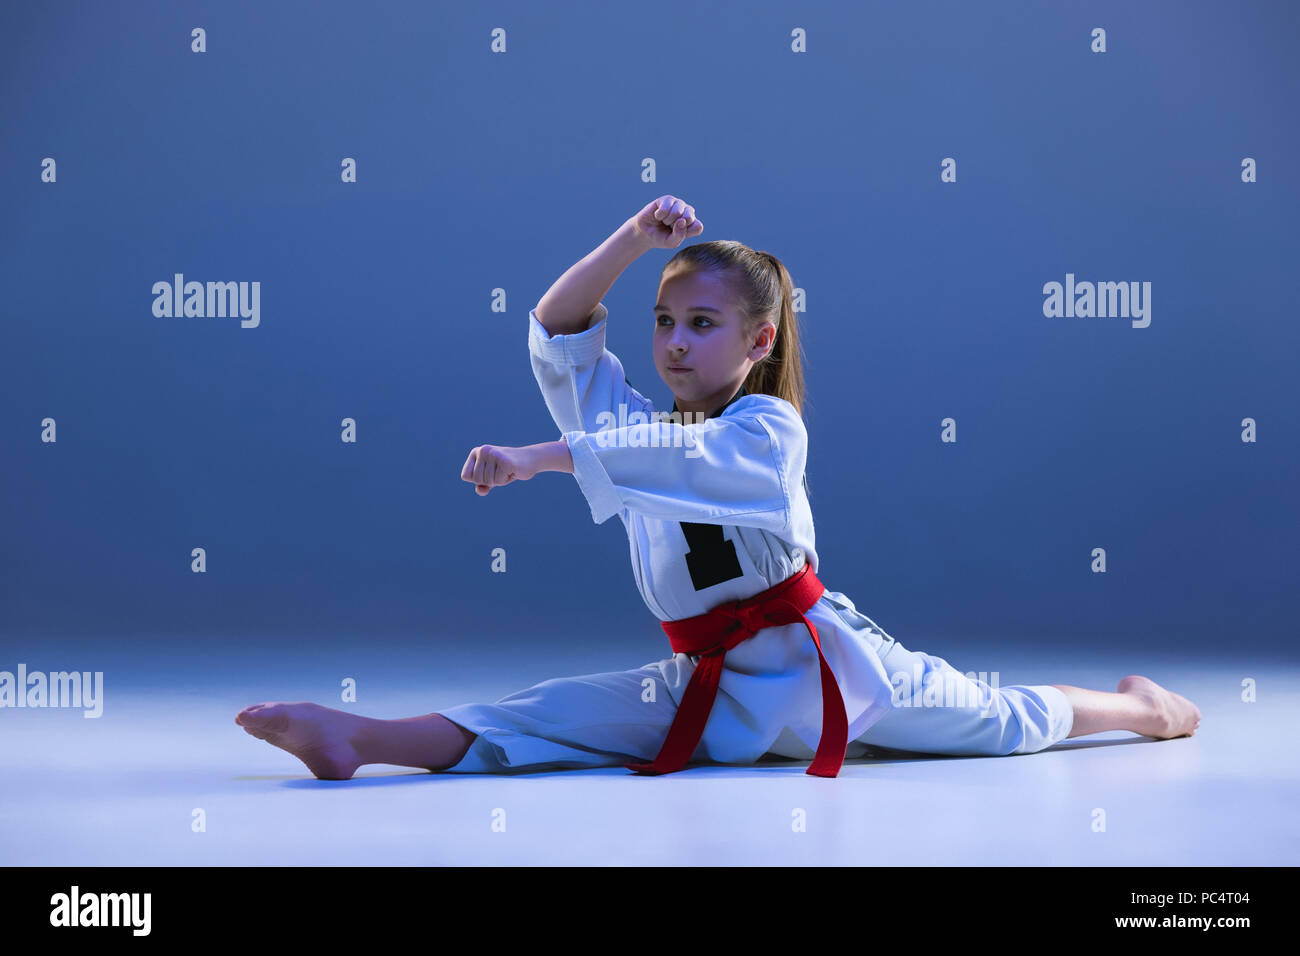 Young girl training karate on blue background Stock Photo